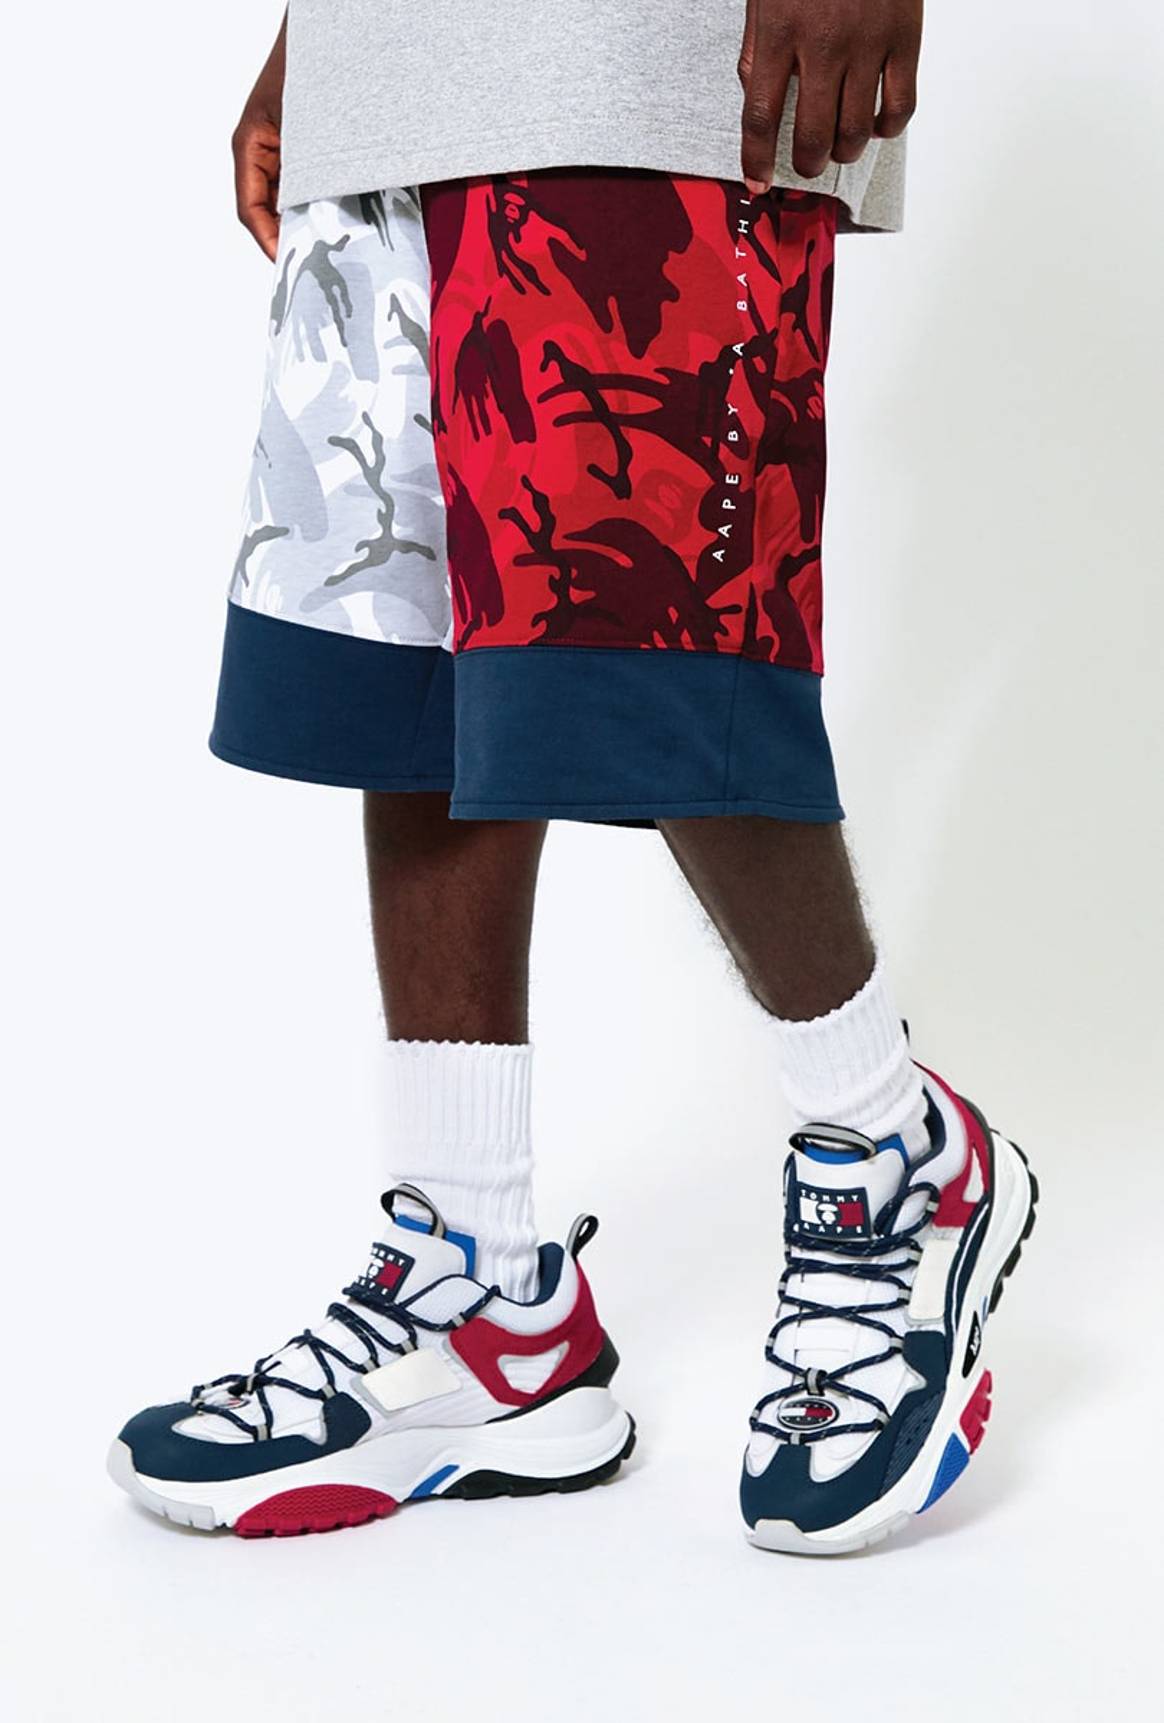 Tommy Hilfiger launches capsule collection with AAPE by A Bathing Ape